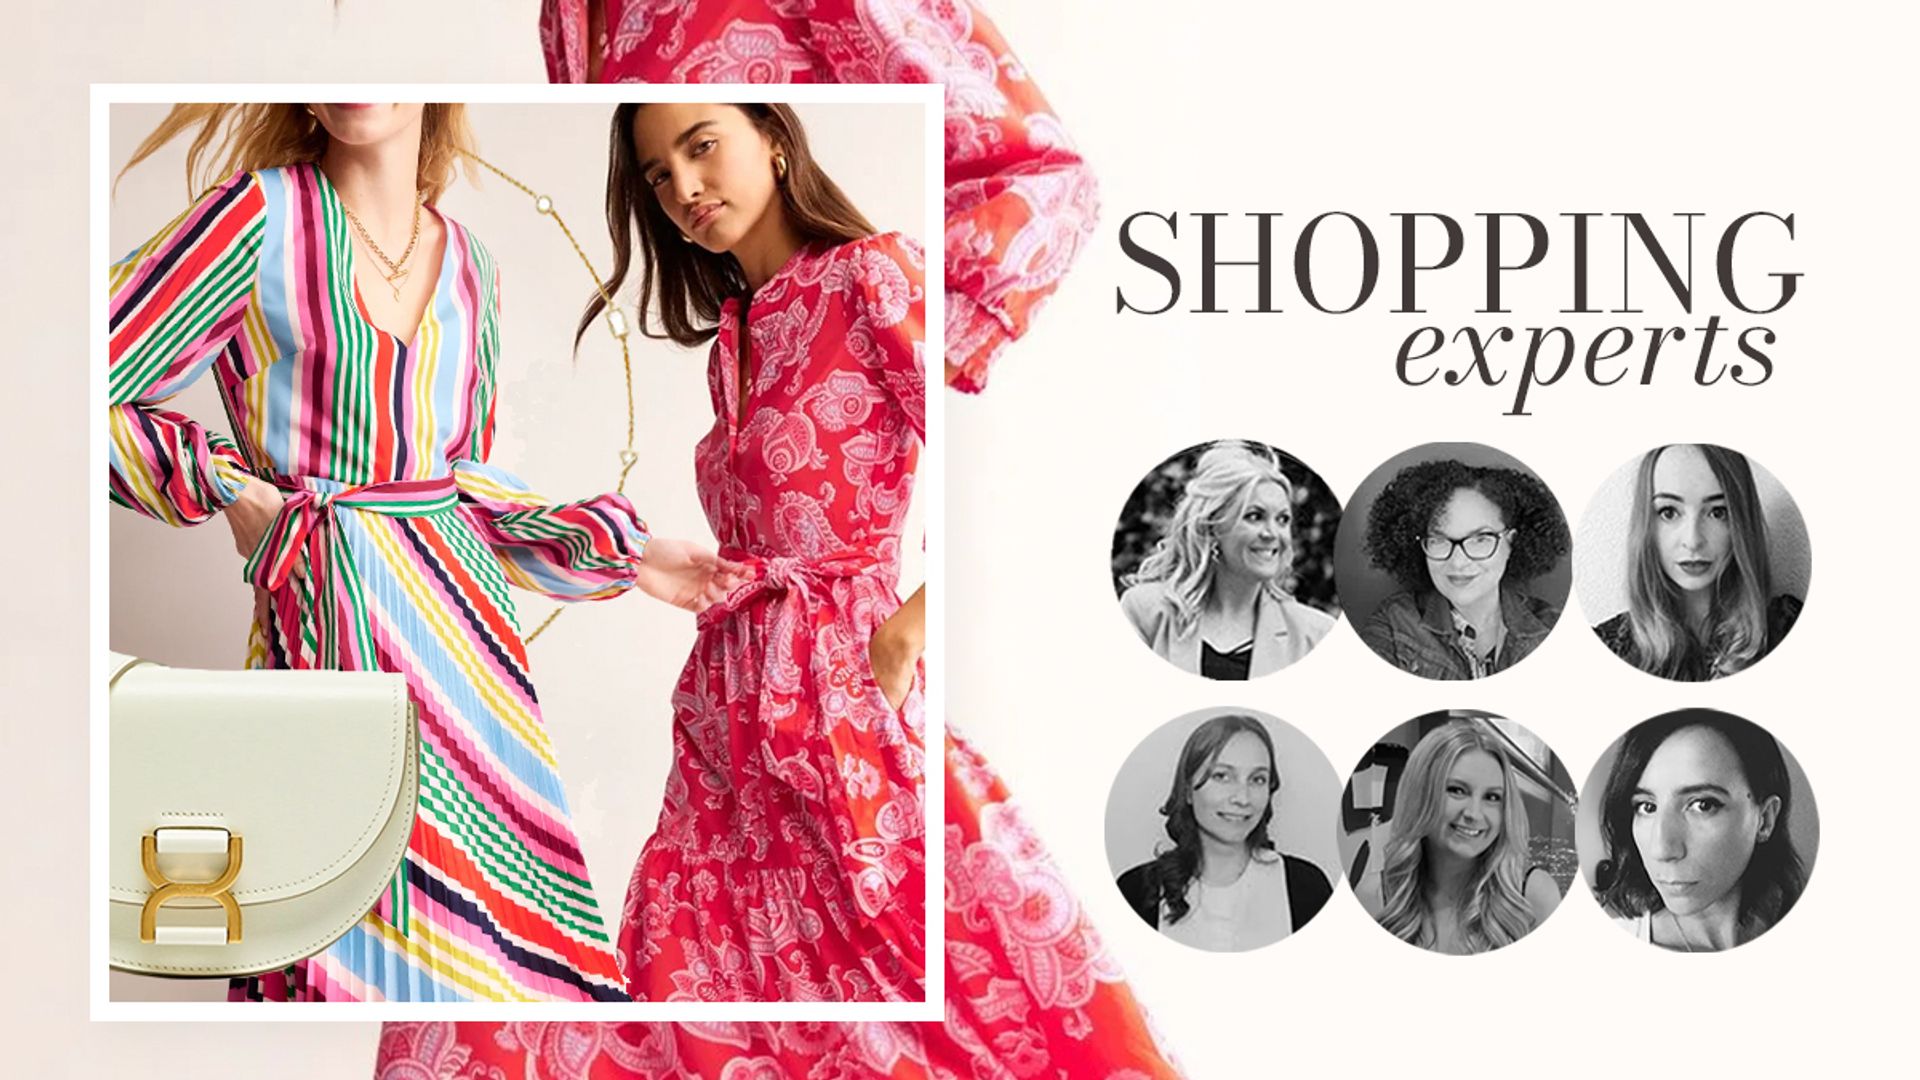 Meet the Hello! shopping experts